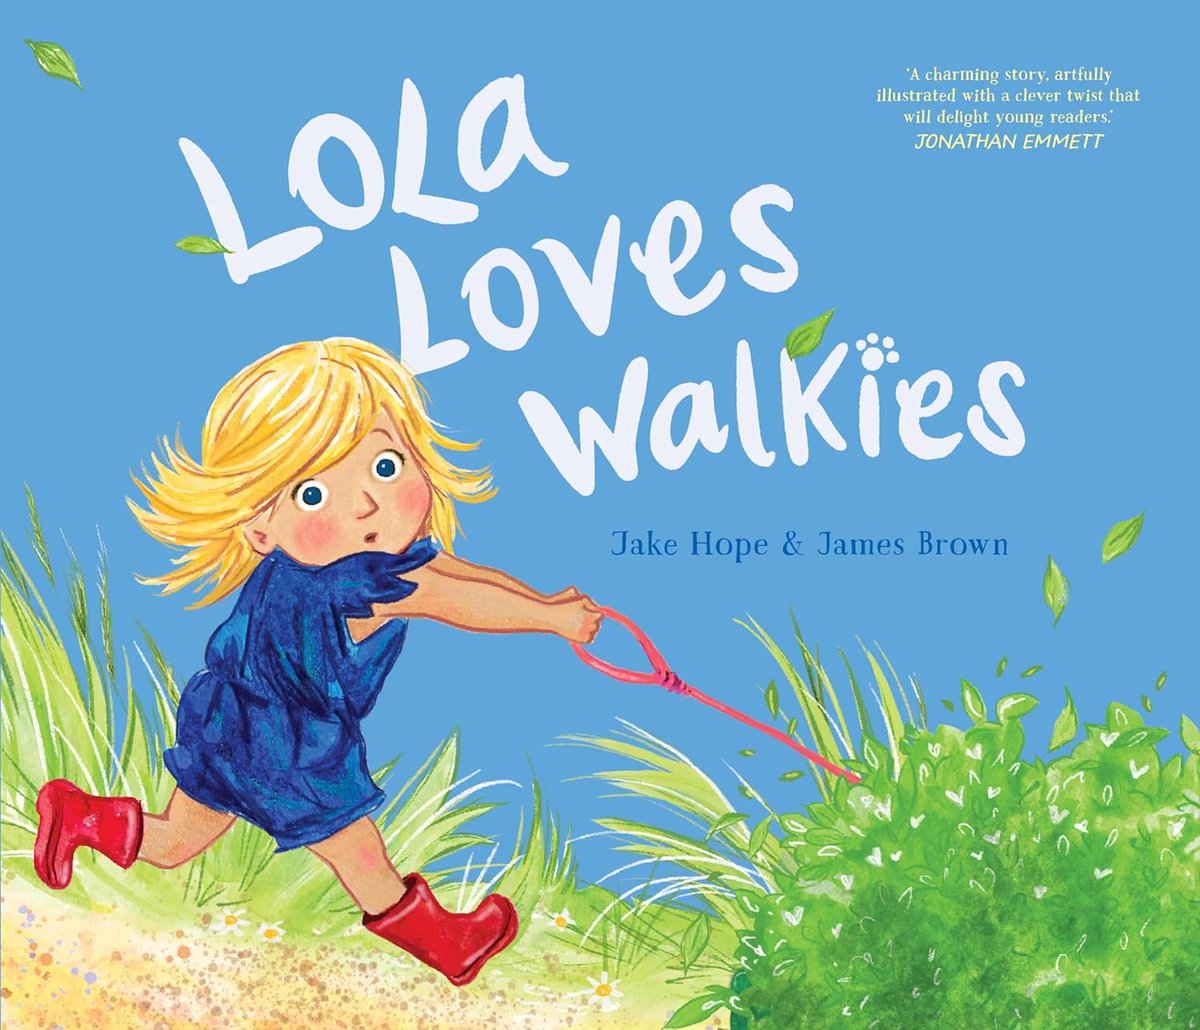 Follow a little girl on a colourful hop, skip & jump journey though nature & the seasons in @Jake_Hope & @jb_illustrates' beautiful picture book #LolaLovesWalkies @publishinguclan pamnorfolkblog.blogspot.com Review also @leponline later this week!